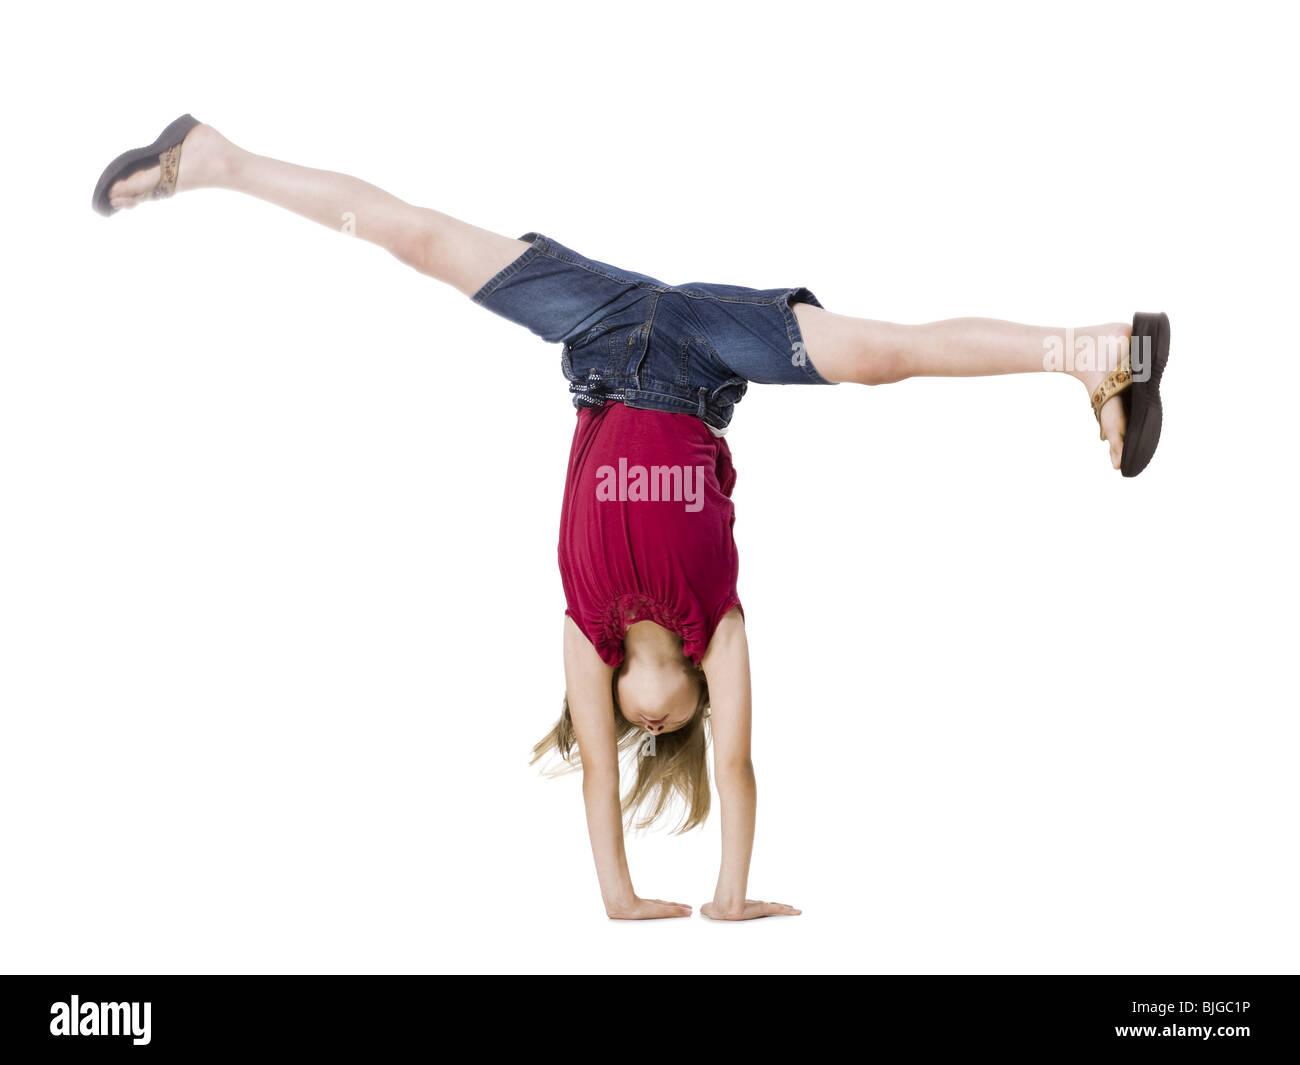 girl doing a hand stand Stock Photo